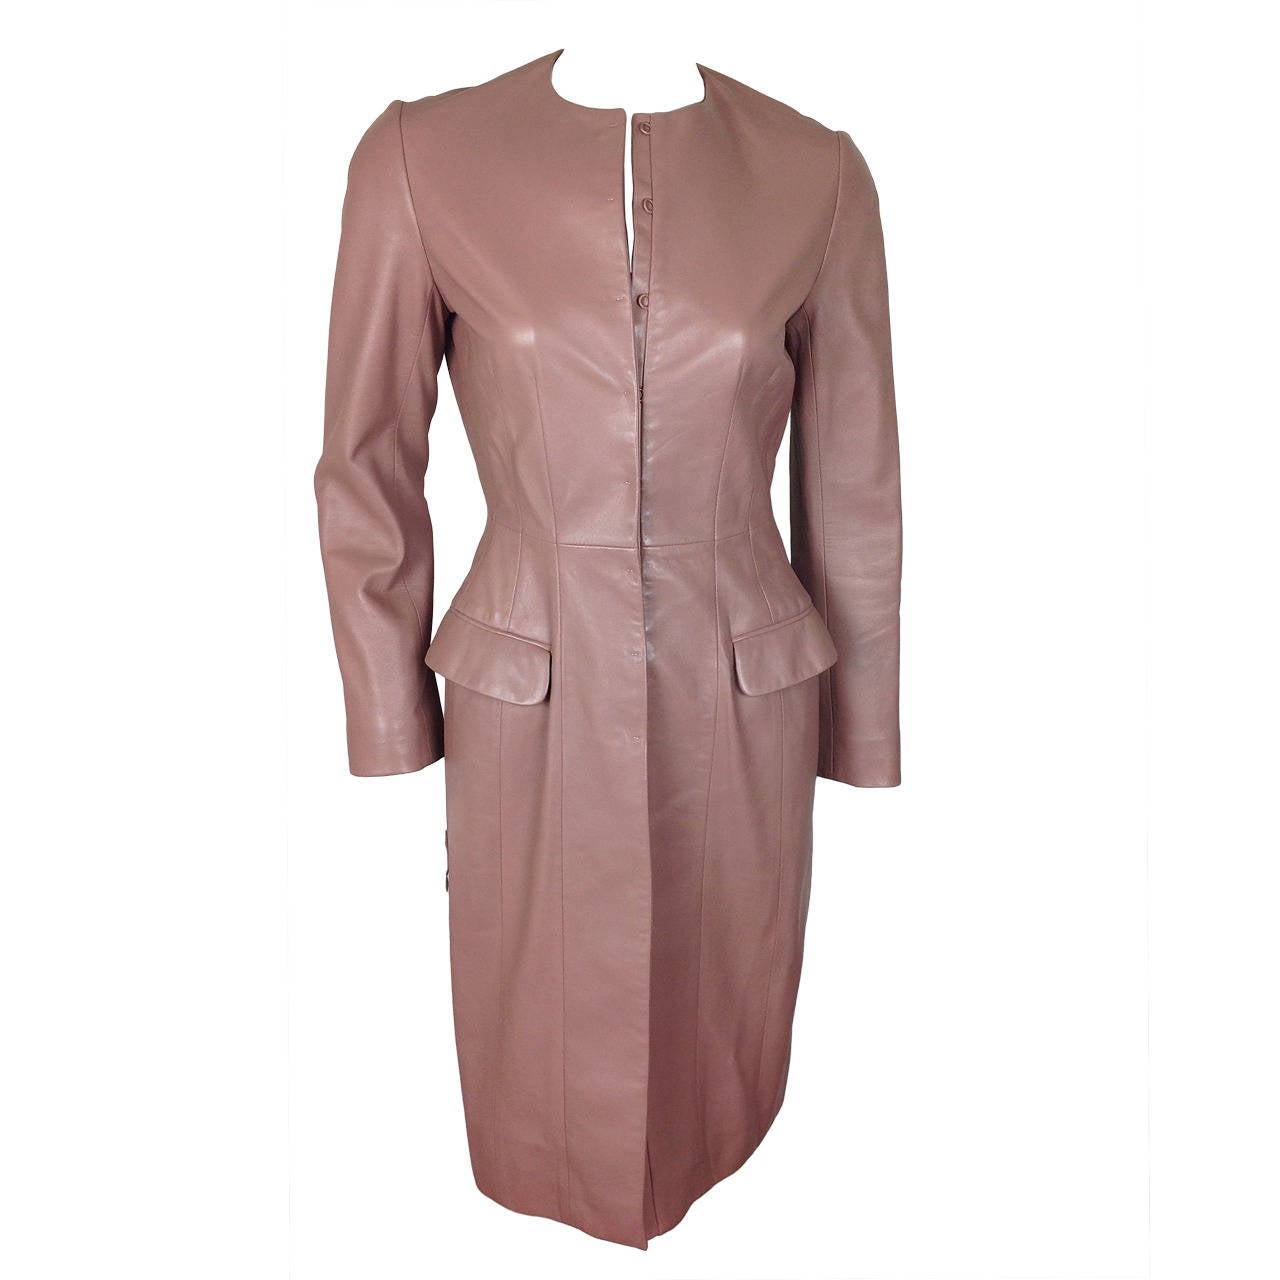 Mauve Christian Dior leather fitted coat dress              Size 4